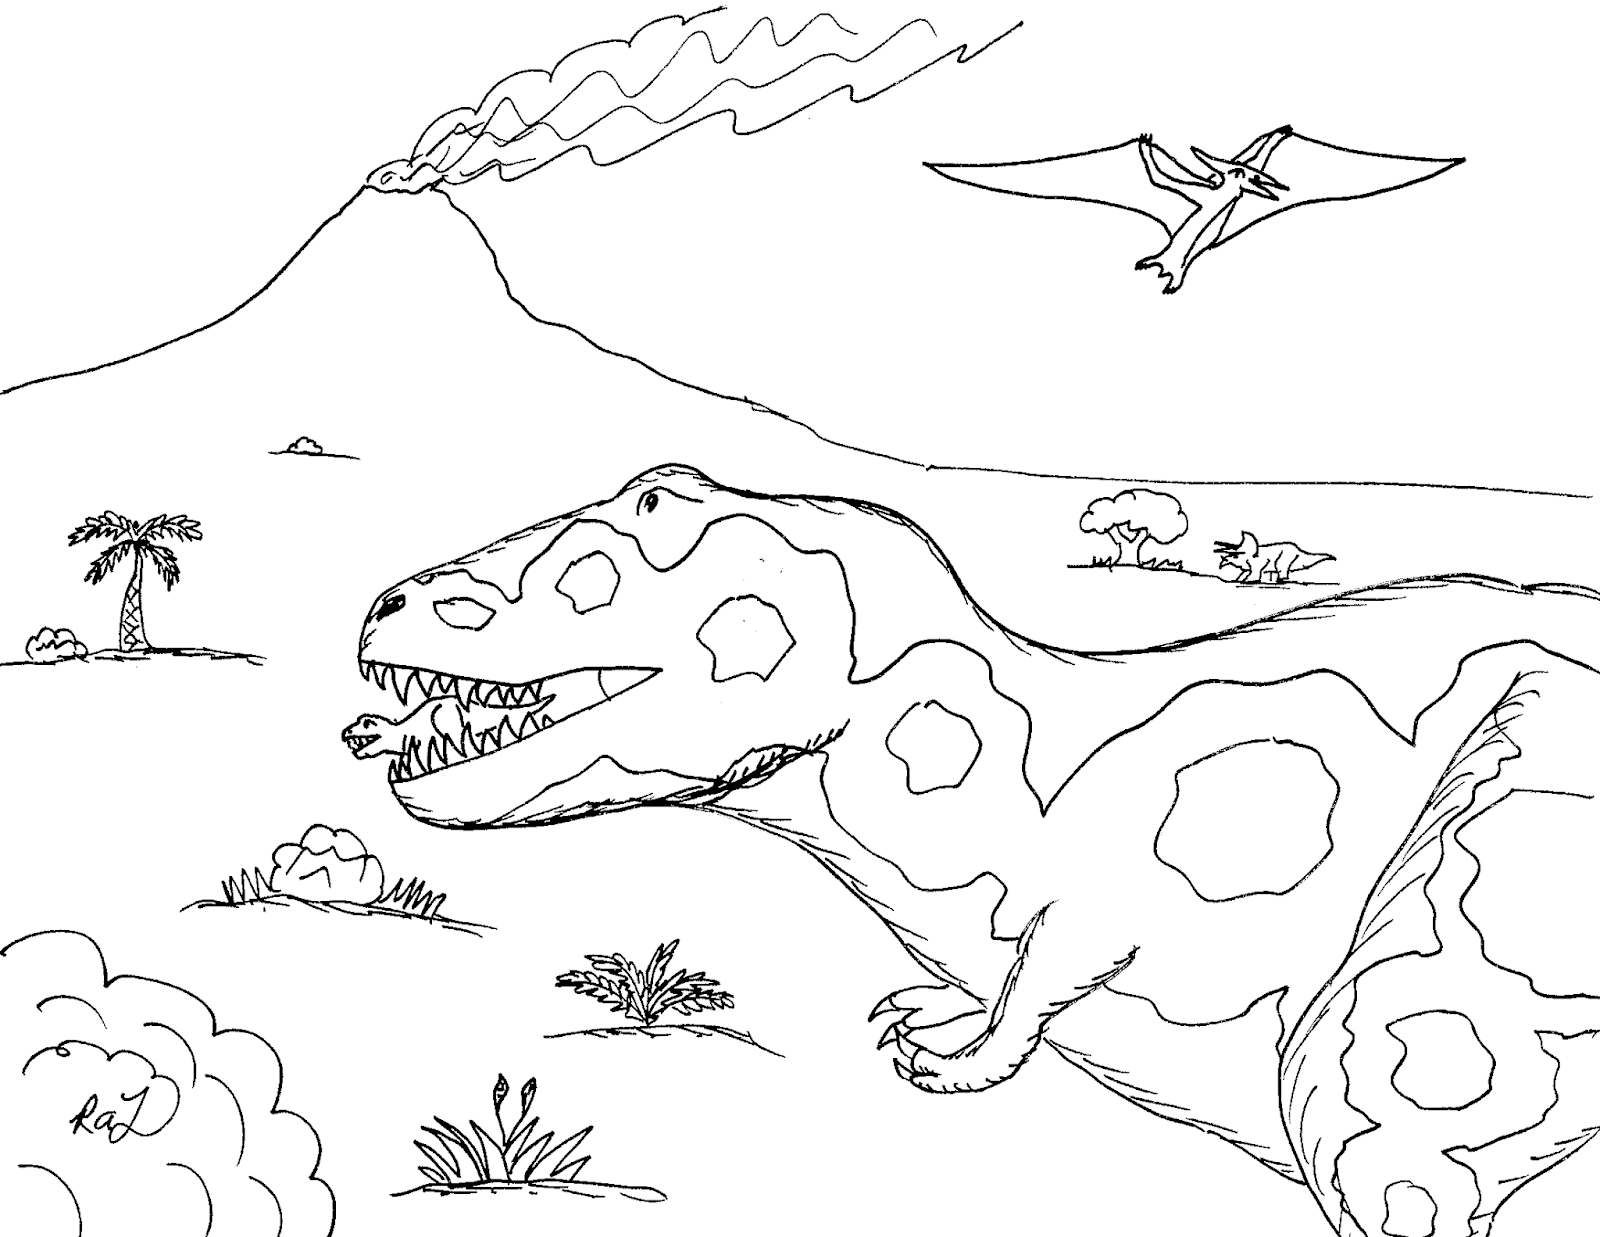 Robin's Great Coloring Pages: Tyrannosaurus rex Mothers for Mother's Day